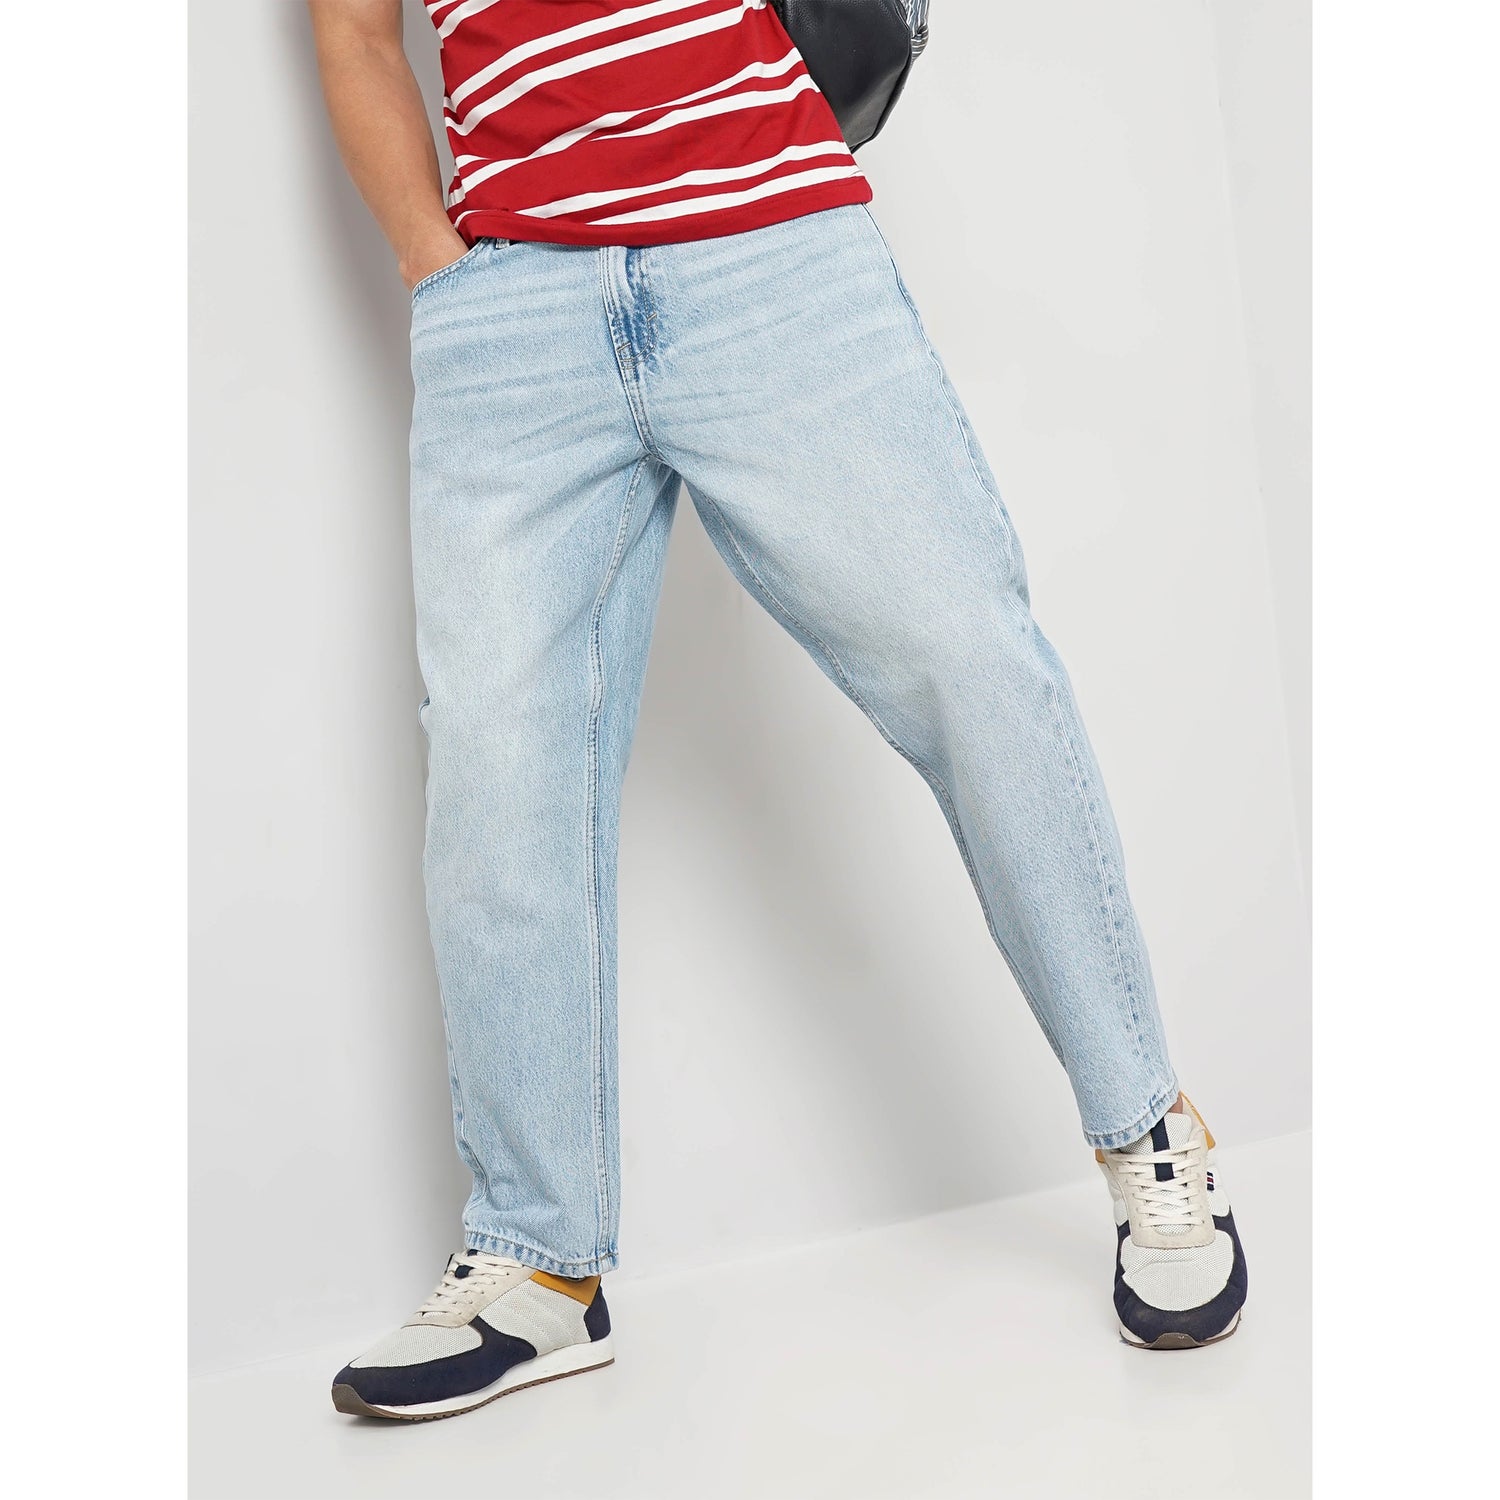 Men's Blue Solid Relaxed Fit Cotton Jeans (FORELAX)